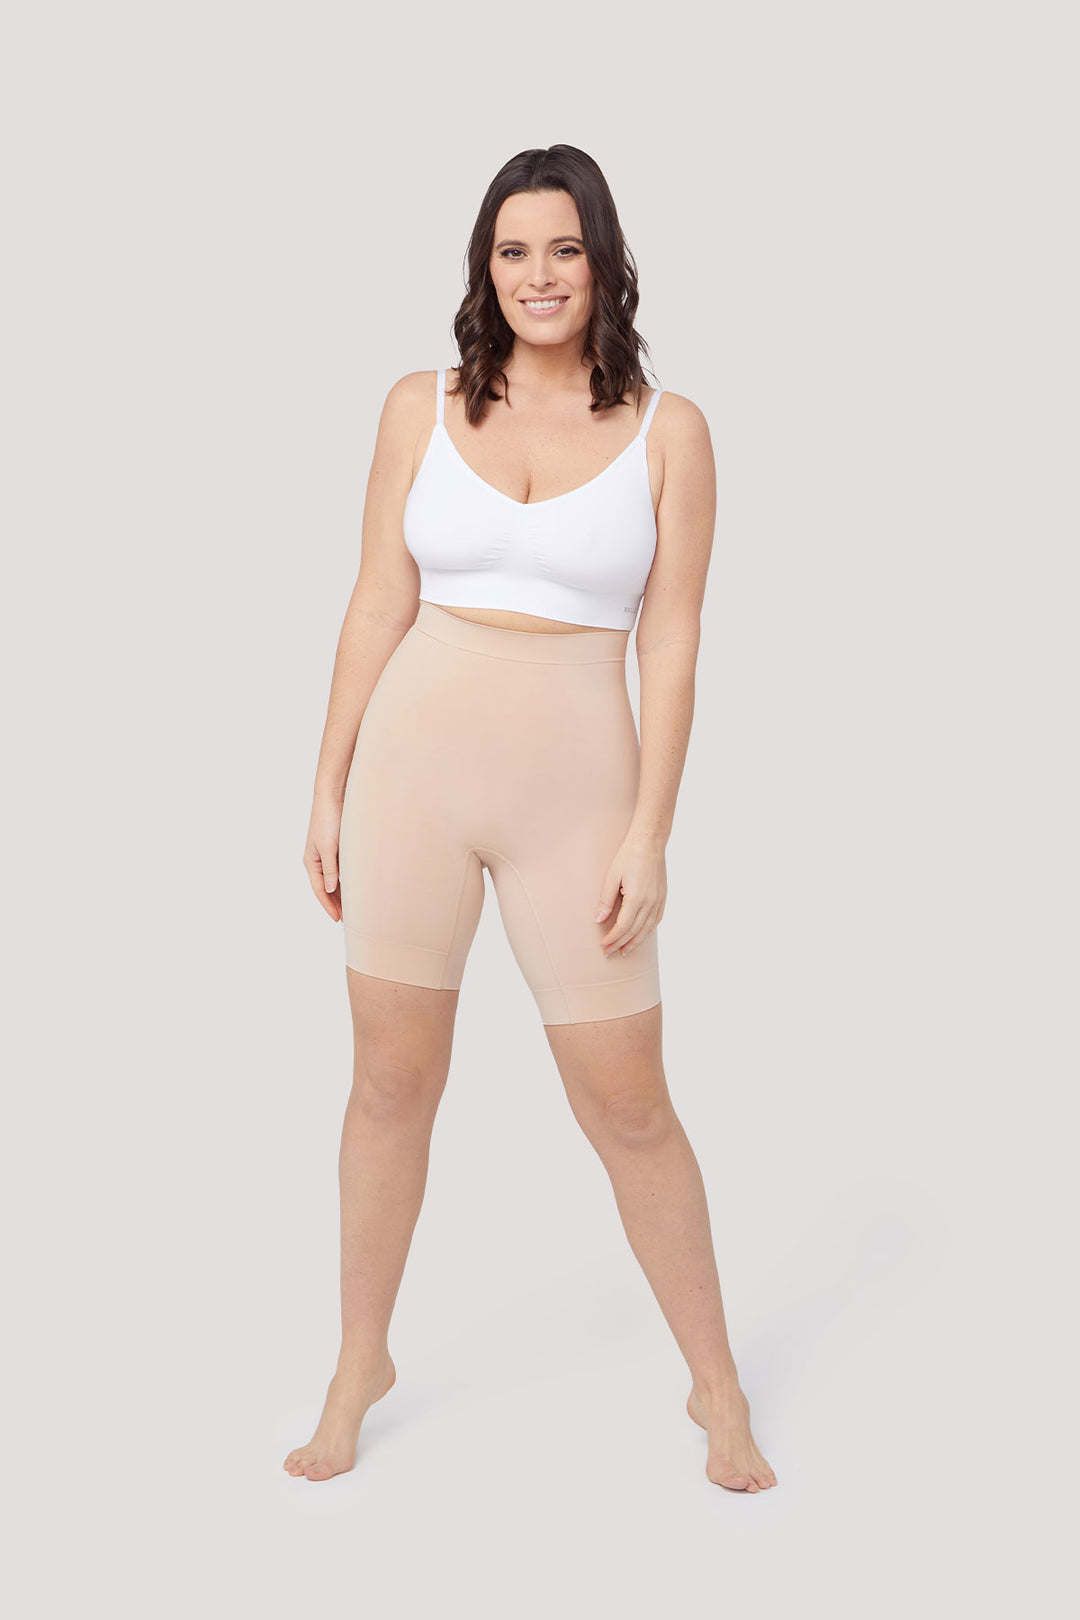 Plus Size Anti Chafing High Rise Long Cotton Shorts 3 Pack